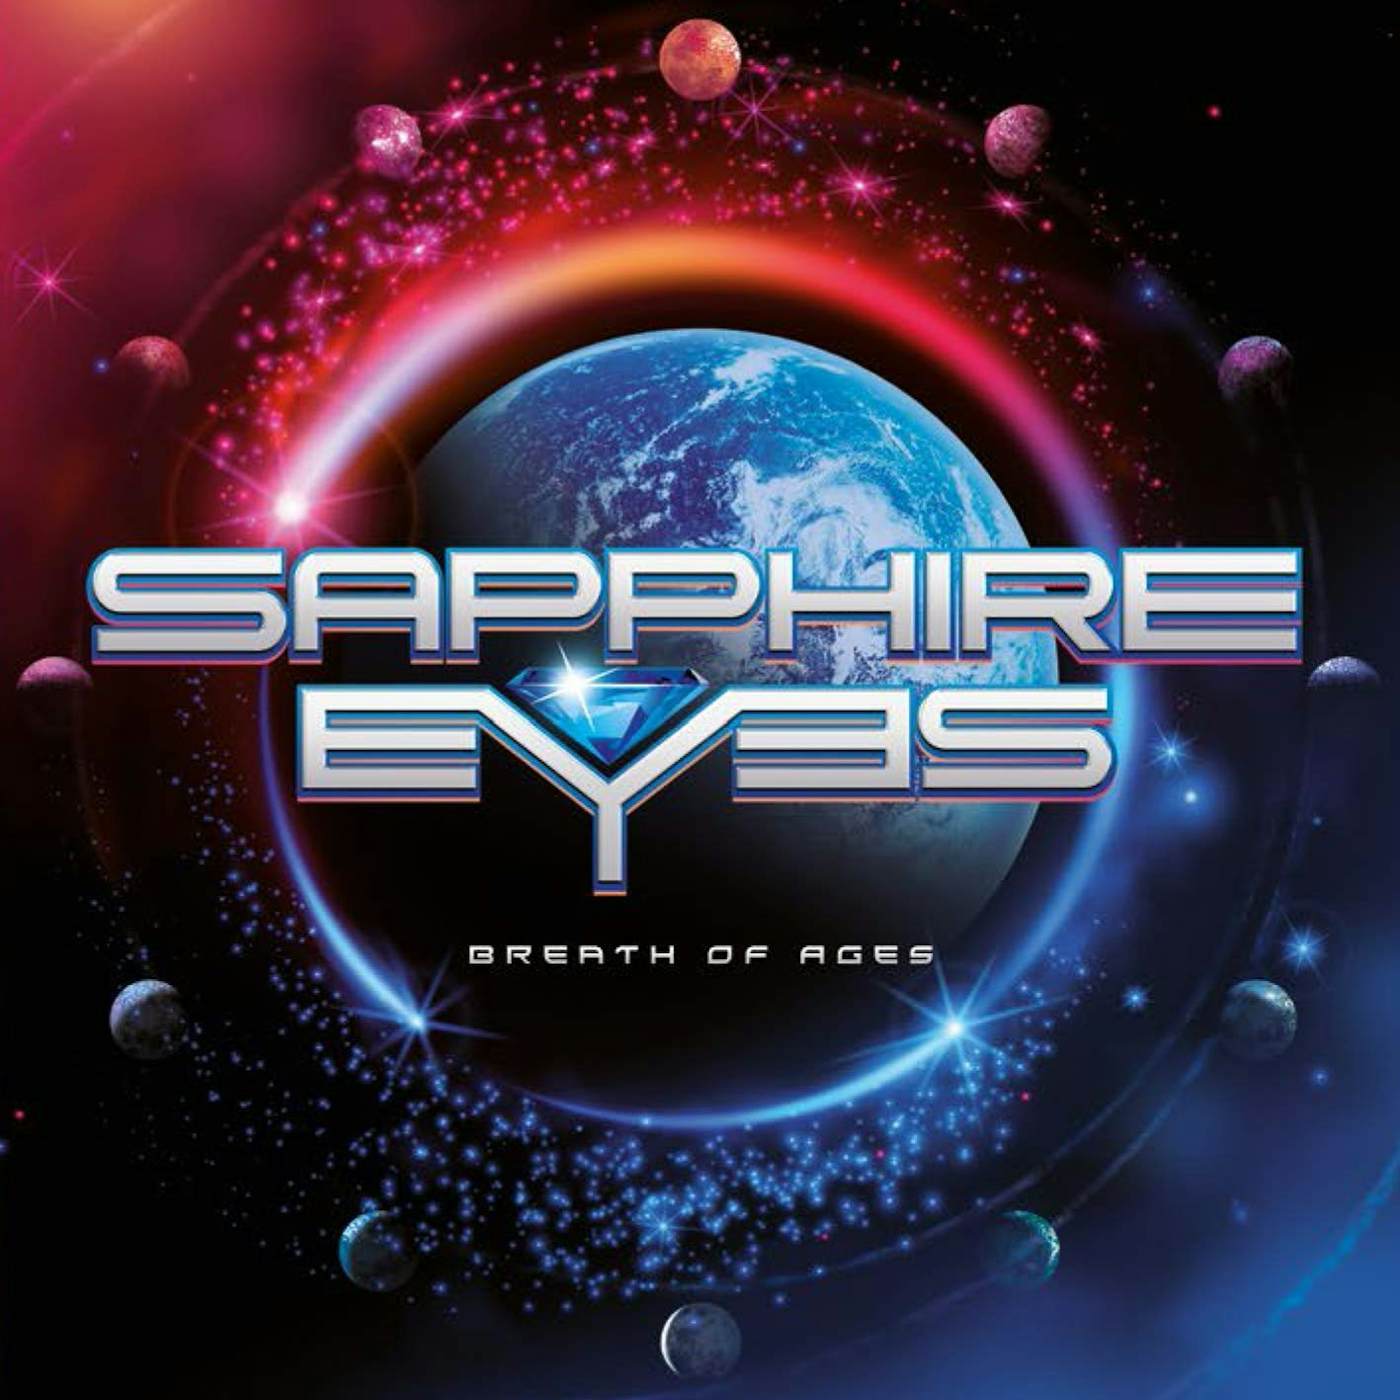 Sapphire Eyes BREATH OF AGES CD